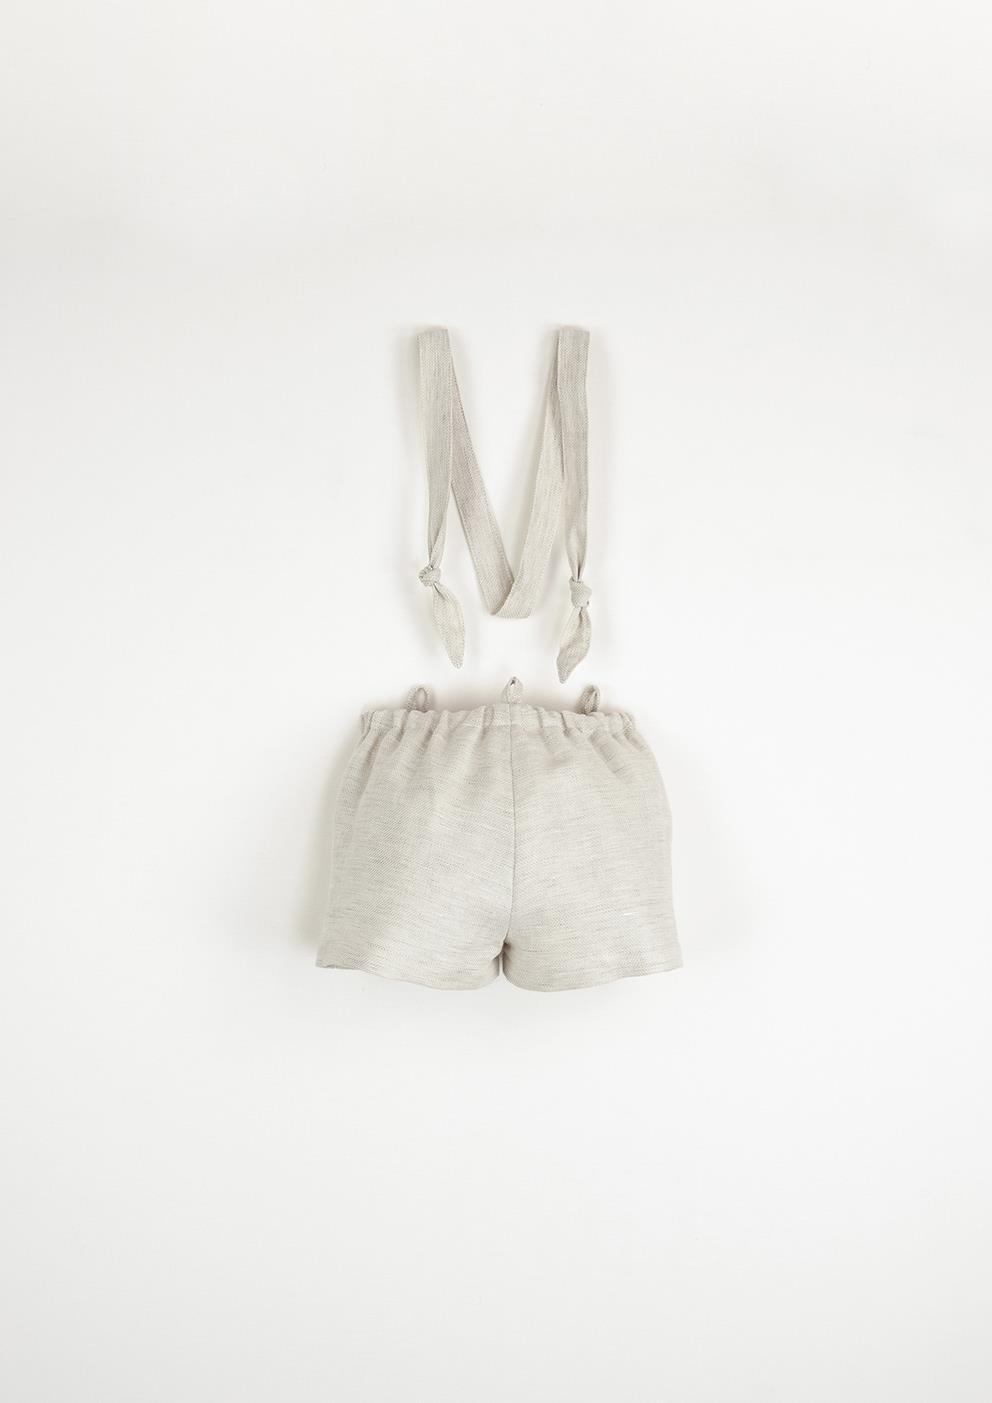 Mod.15.6 Neutral colour dungarees with remova- ble straps | SS23 Mod.15.6 Neutral colour dungarees with remova- ble straps